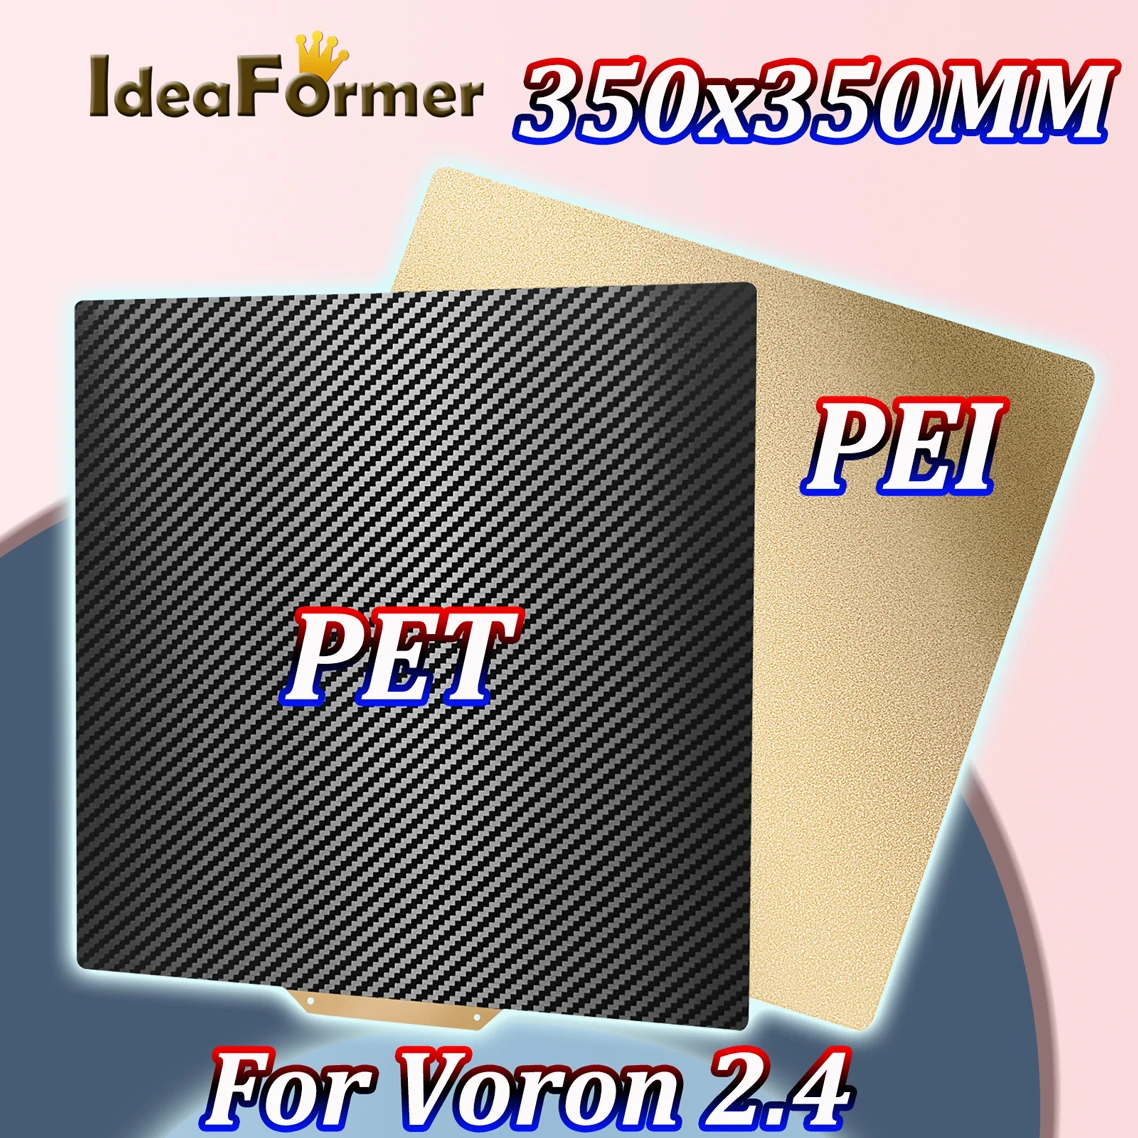 

For Voron 2.4 Build Plate PEI Sheet 350mm Pei Magnetic Smooth/Textured PET Double Sided For 3D Printer FYSETC Voron 2.4 Hot Bed